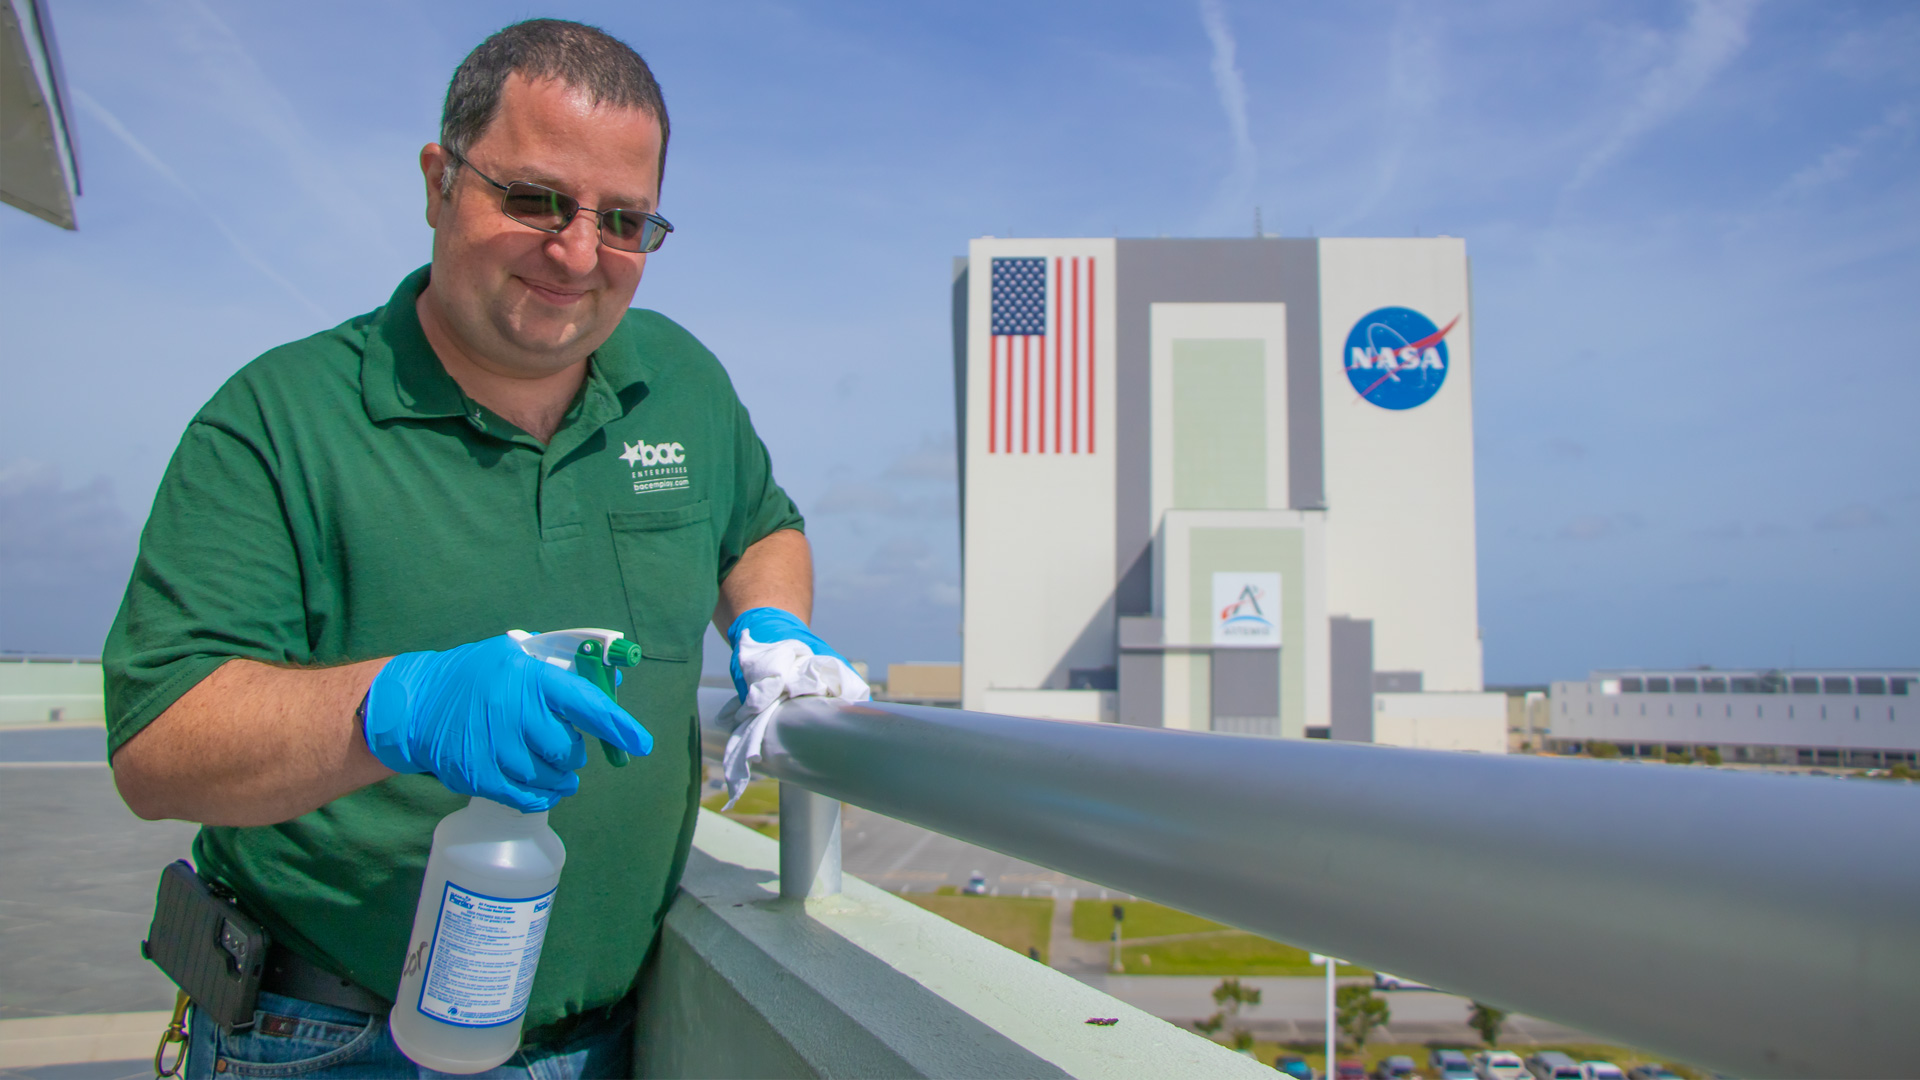 Custodian, Jeremy Herbert, cleaning railing at Kennedy Space Center Center